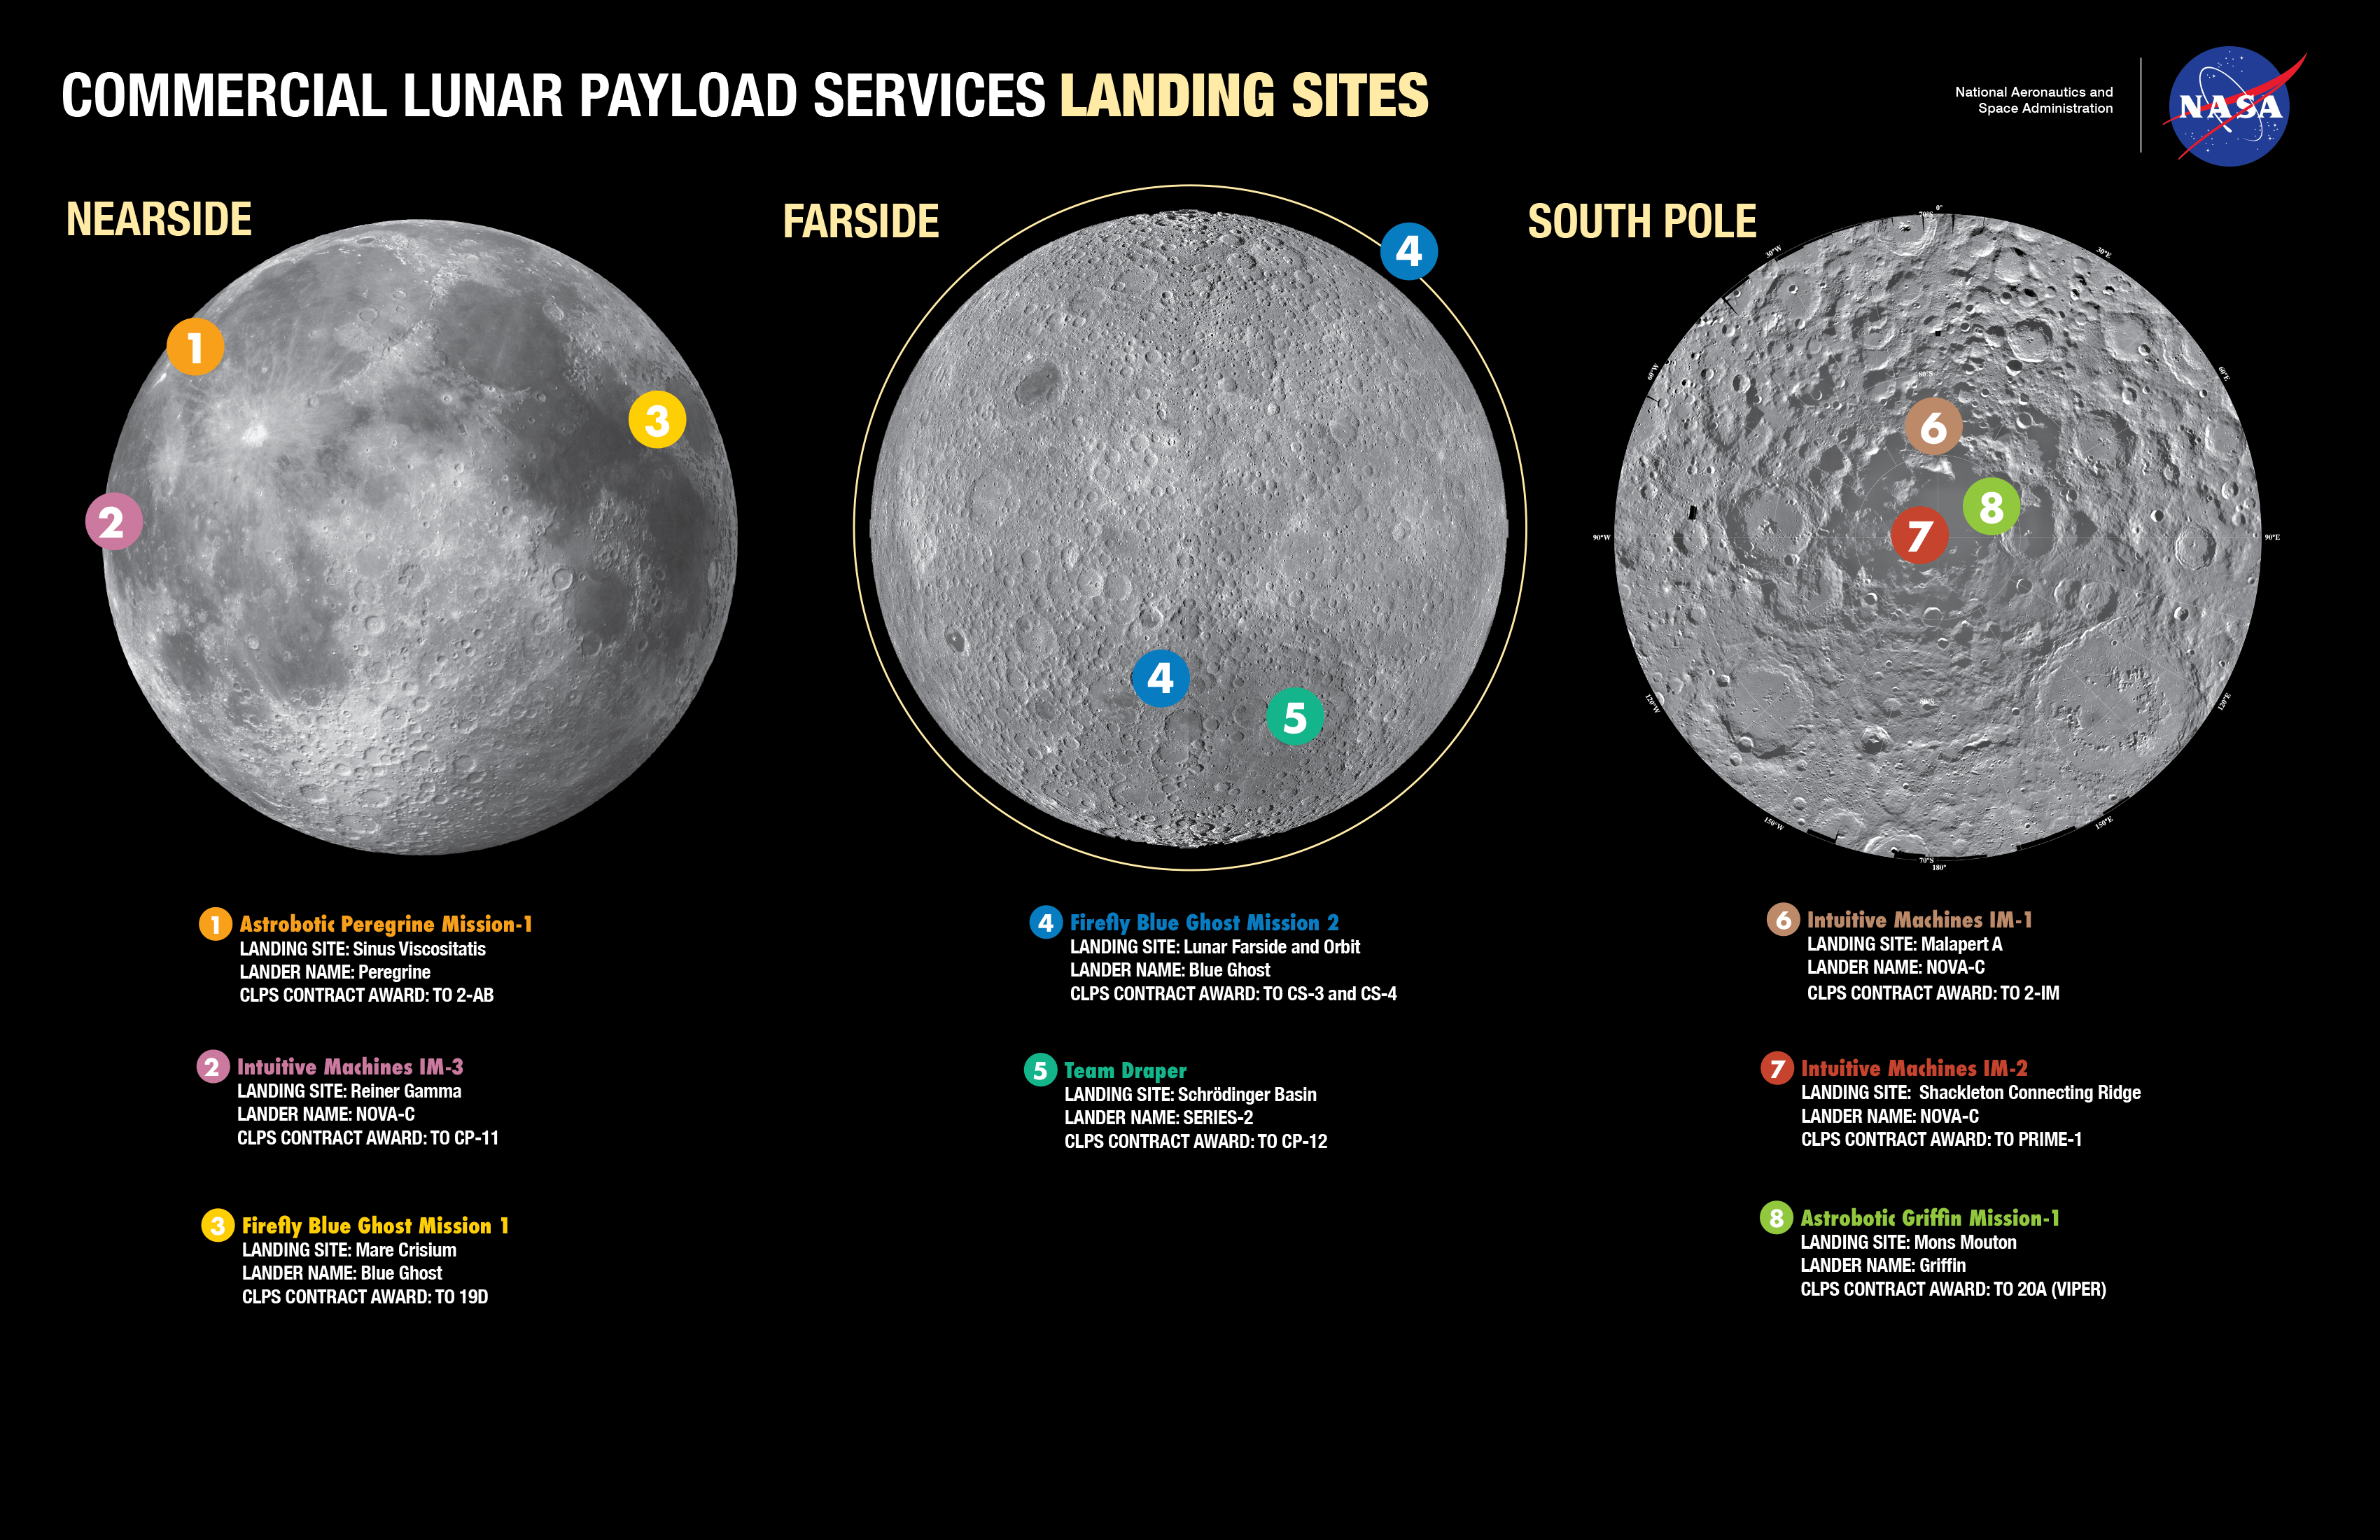 Maps of 3 views of the moon with landing locations denoted with pins. Mission landing locations key provided.